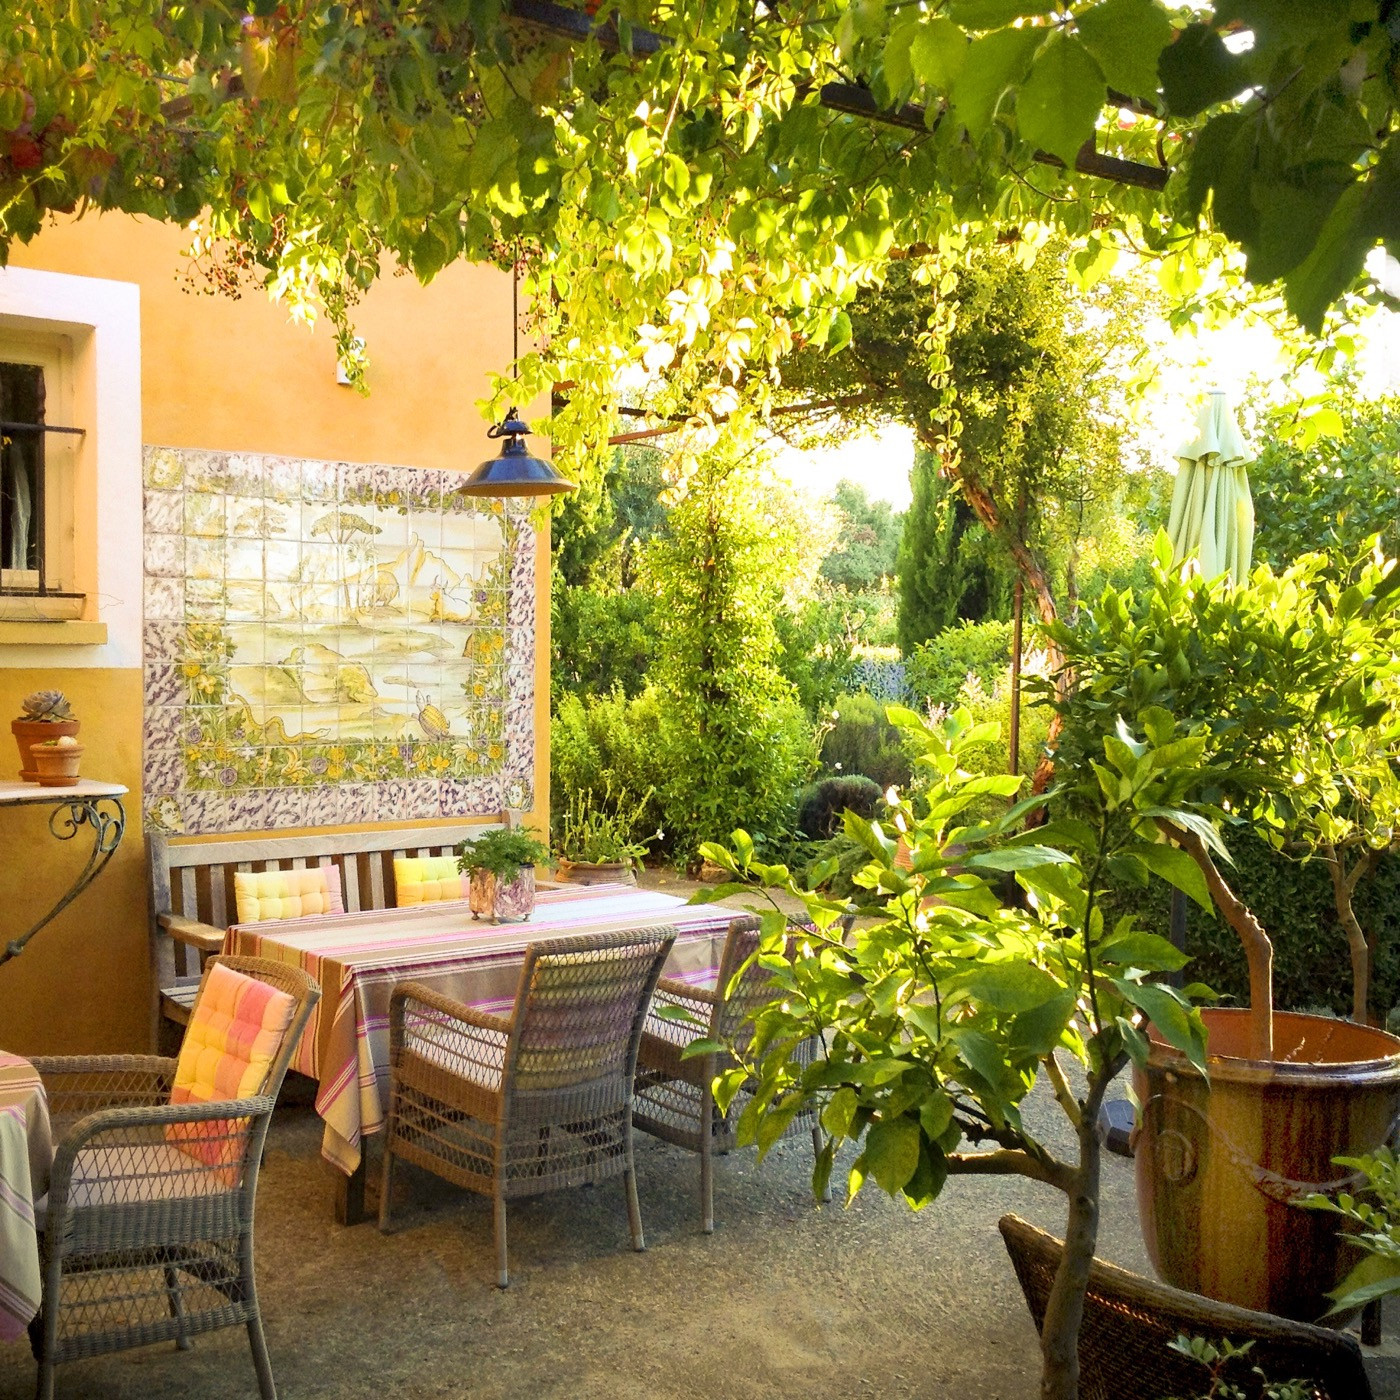 Your terrace for breakfast under the vines and between lemon trees